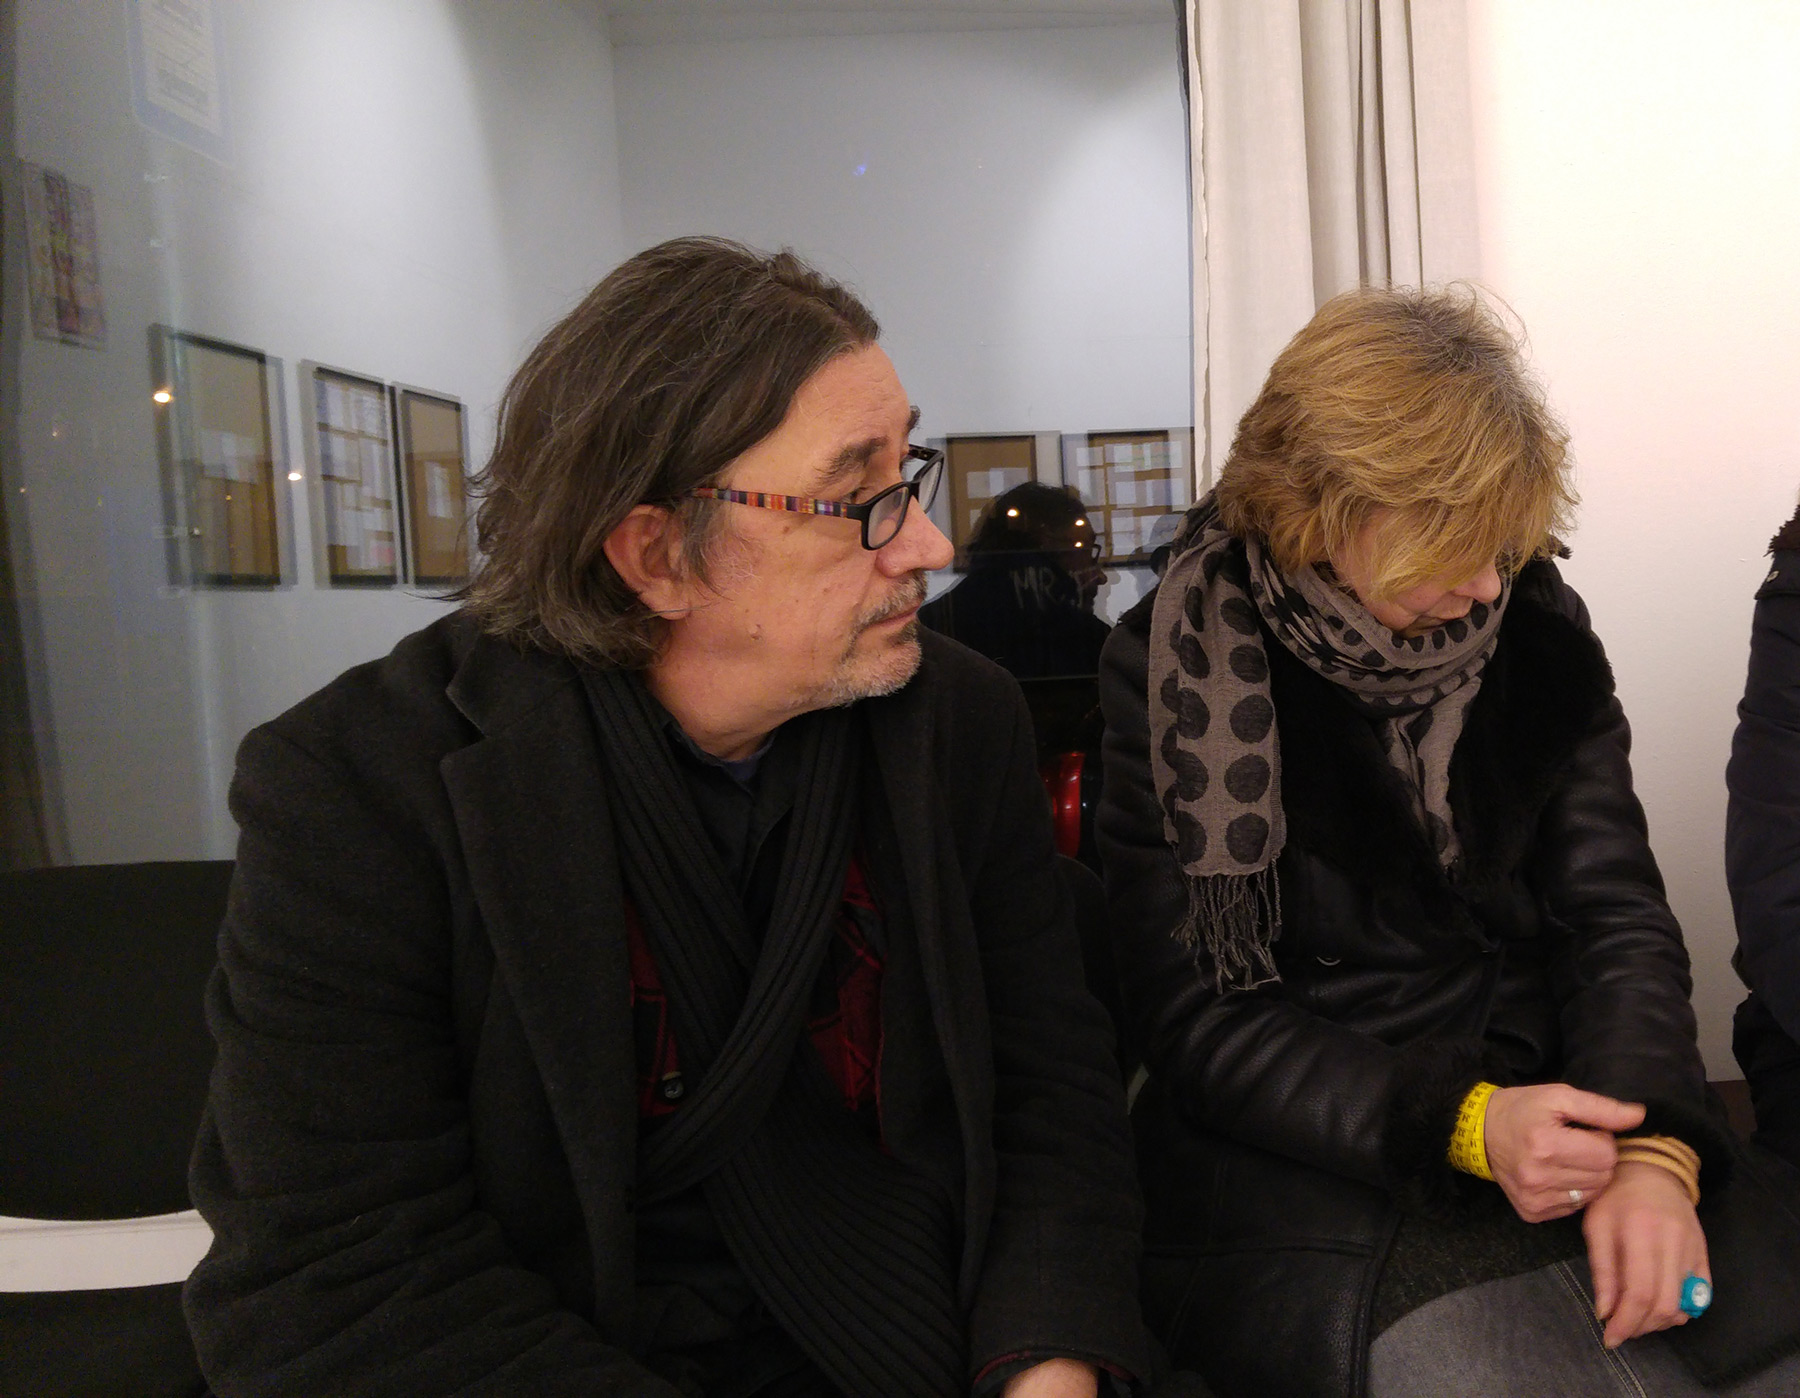 Tibor Várnagy and his wife at an opening in the Liget Gallery, 2018